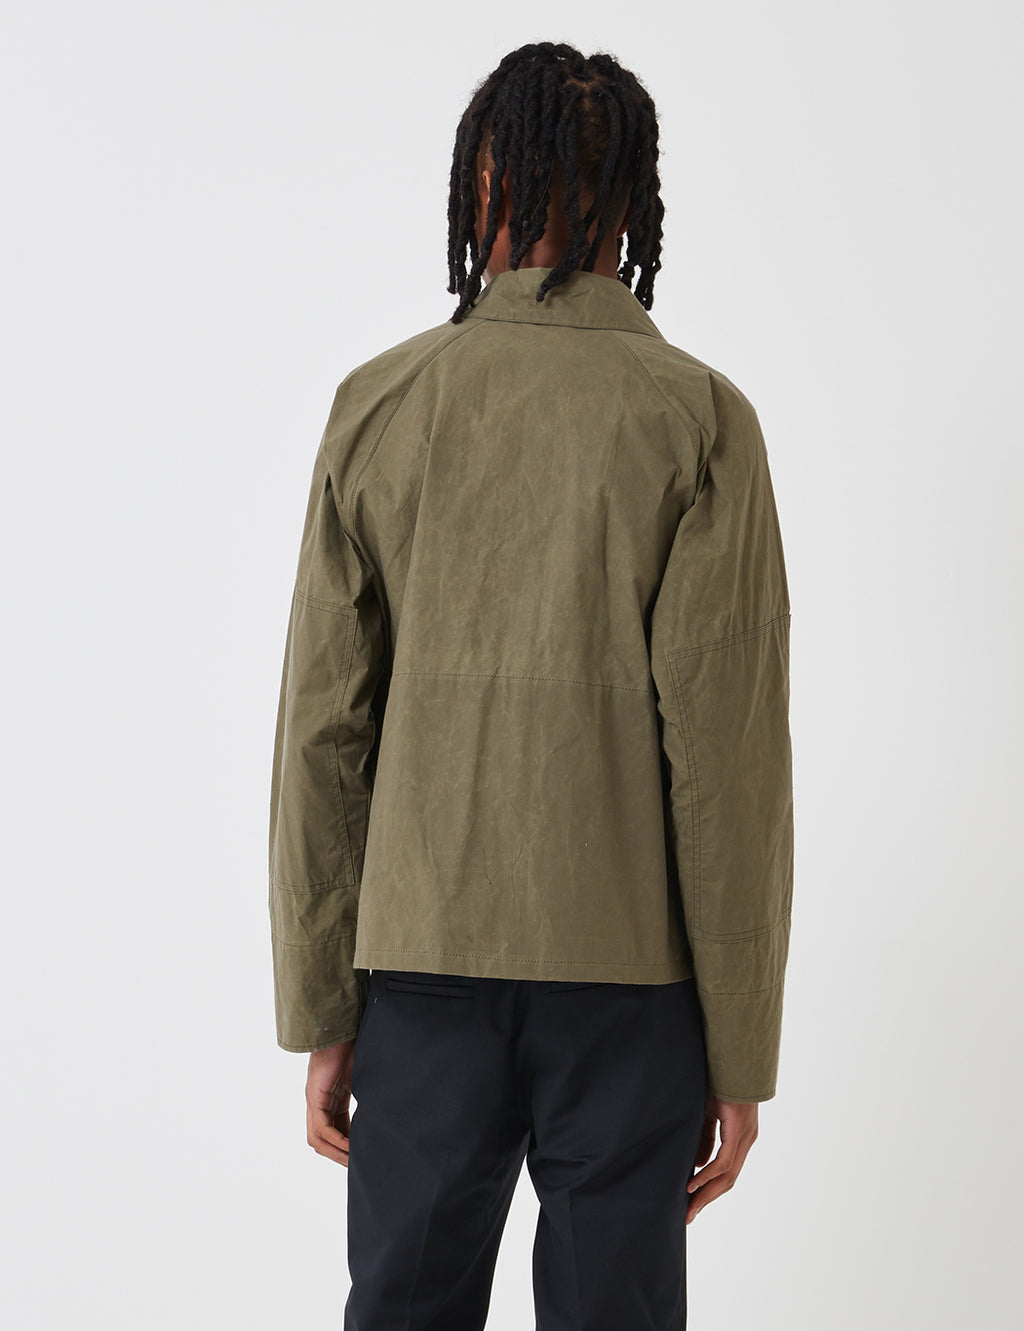 Barbour x Engineered Garments Unlined Graham - Olive | URBAN EXCESS ...